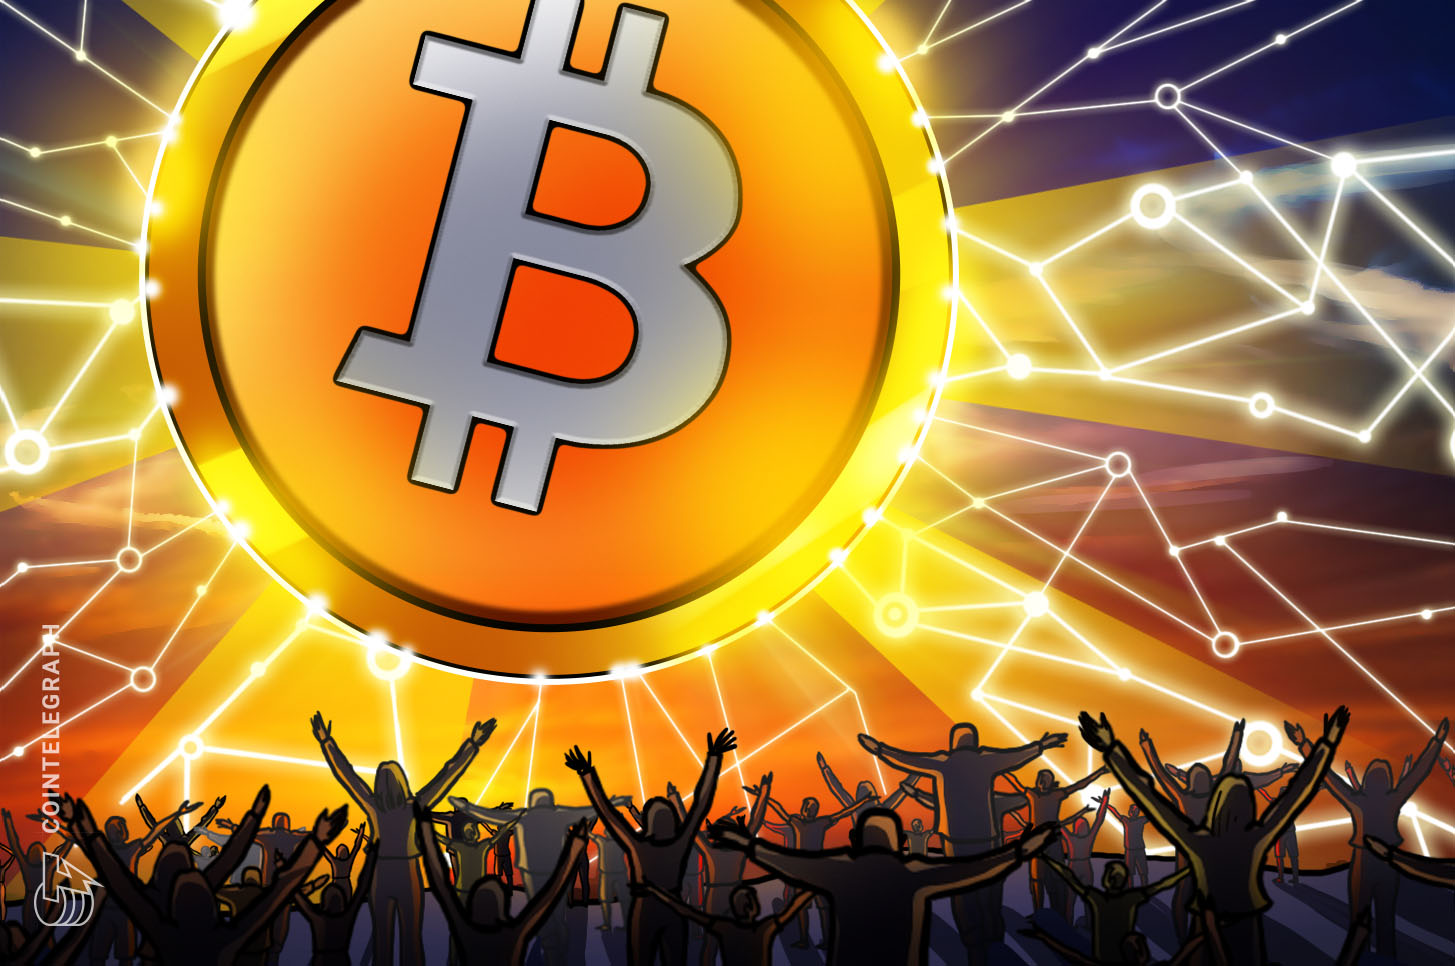 Bitcoin analyst sees ‘excellent backdrop’ for $100Ok this bull cycle, $1M by 2035